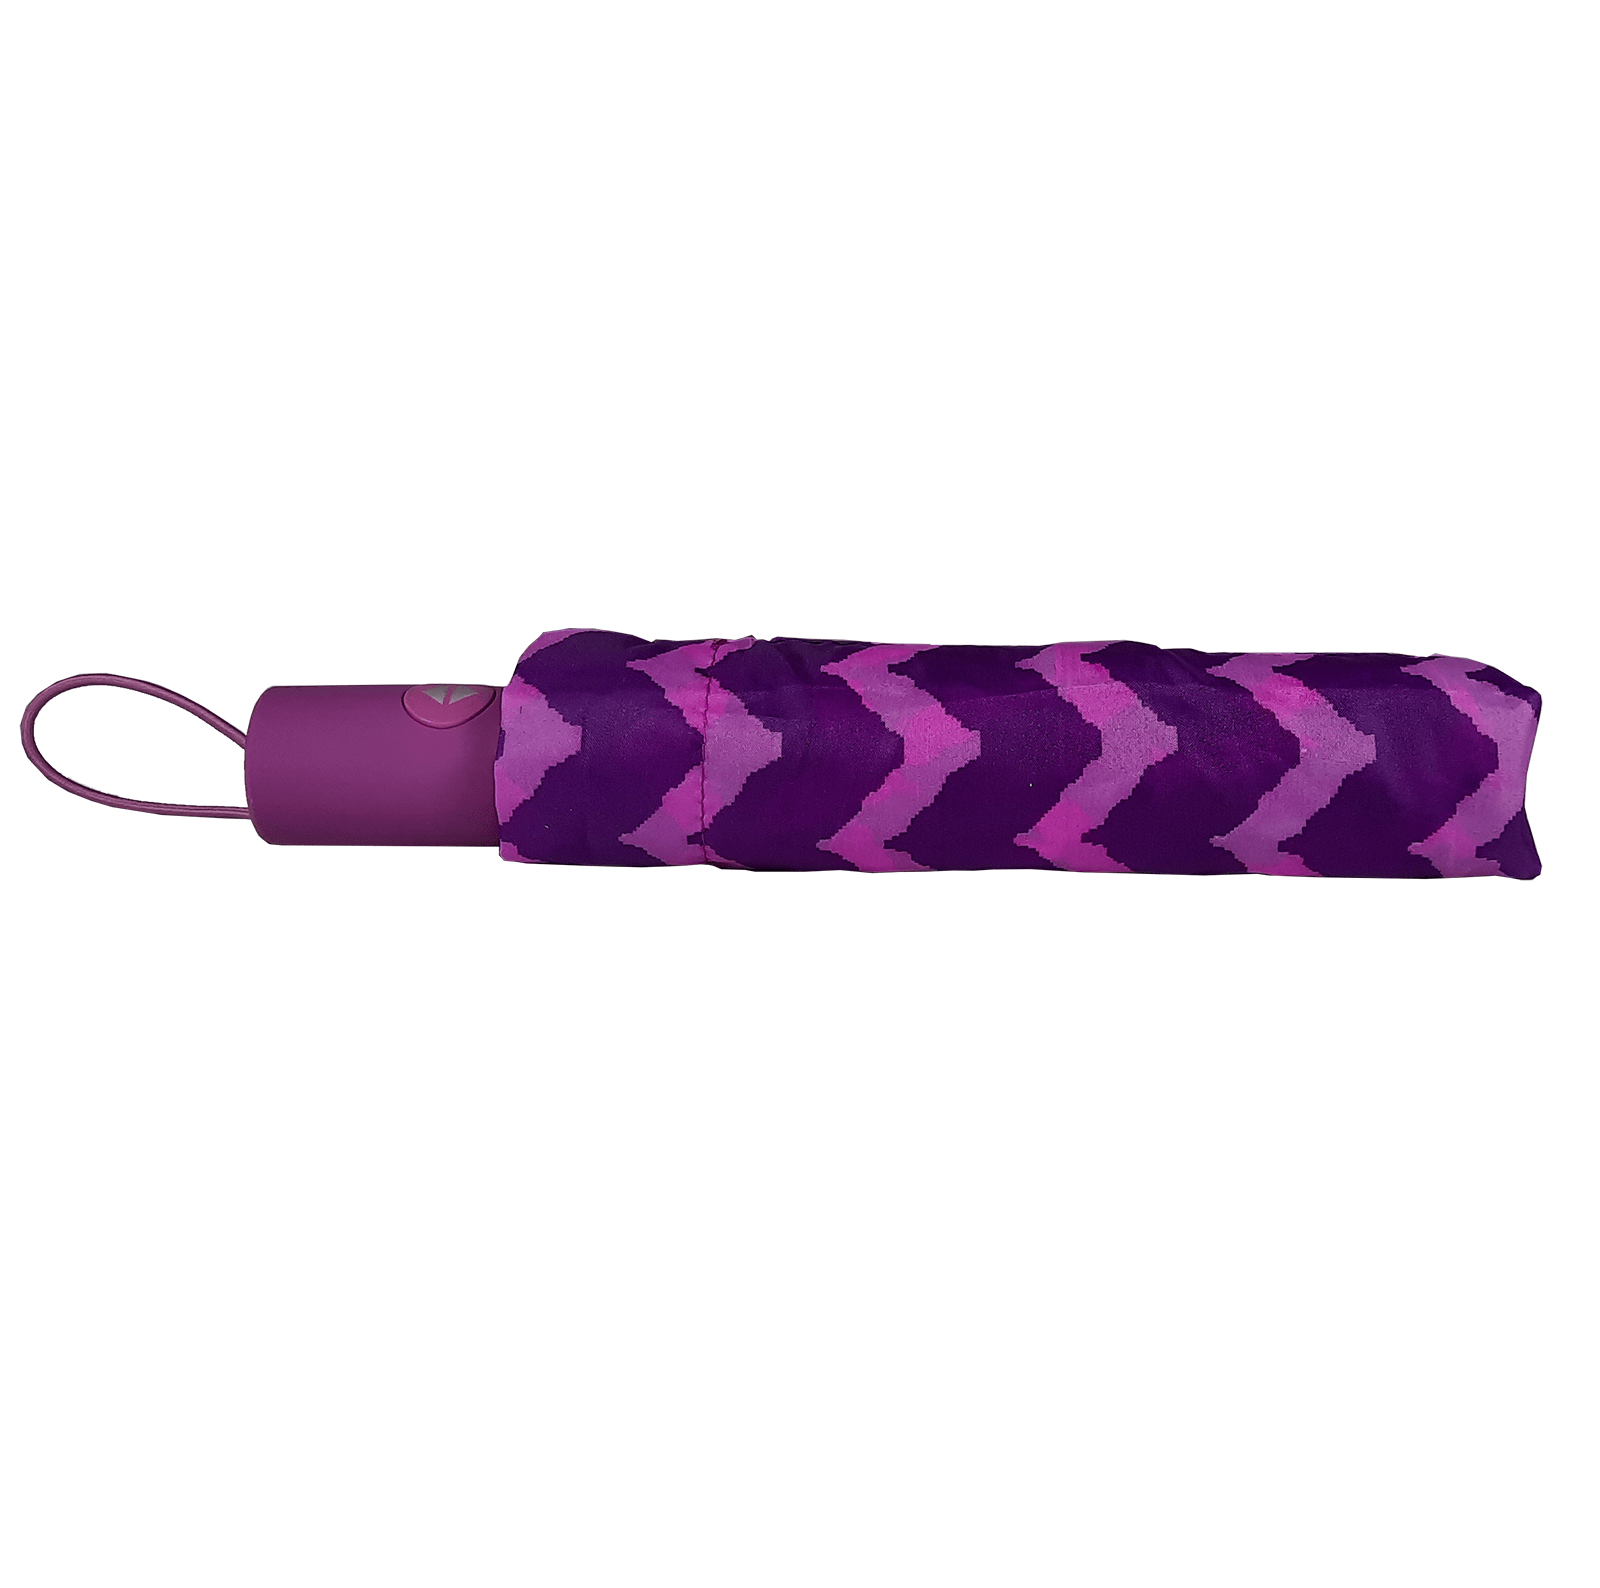 Purple Patterned Compact Umbrella in sleeve